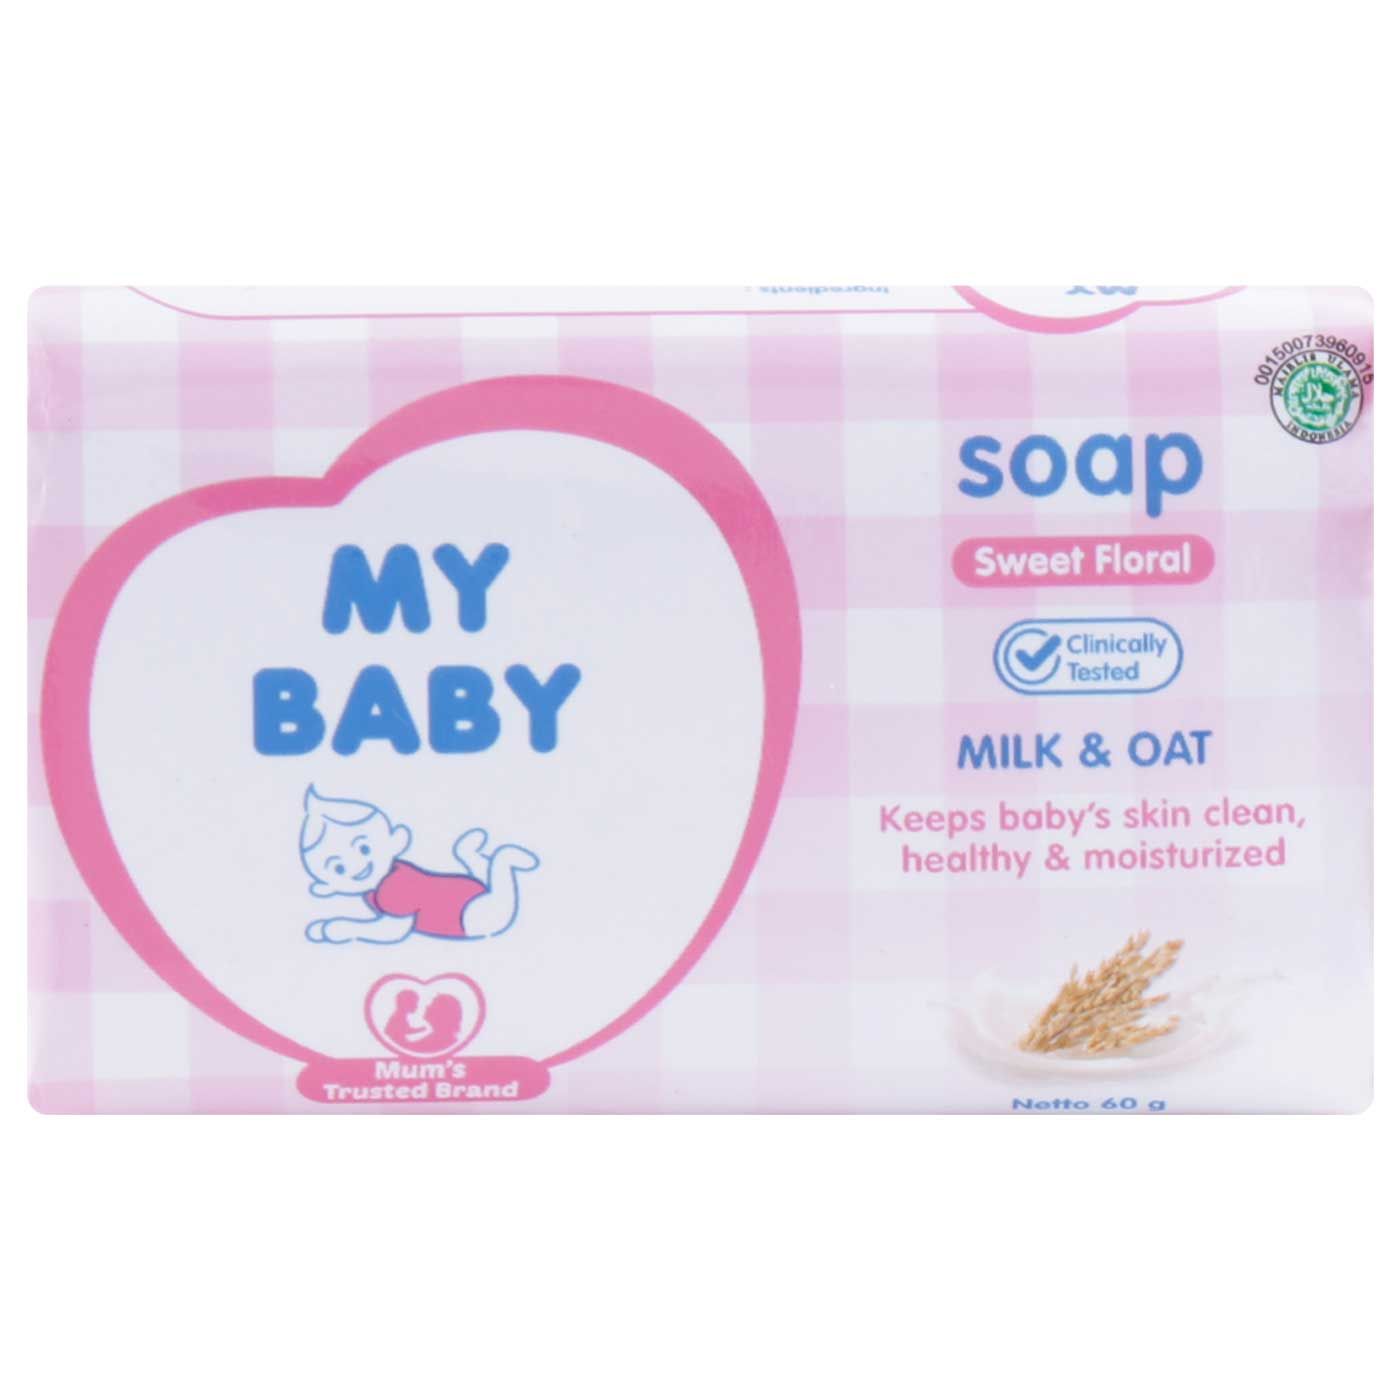 My Baby Soap Sweet Floral 60gr - 2